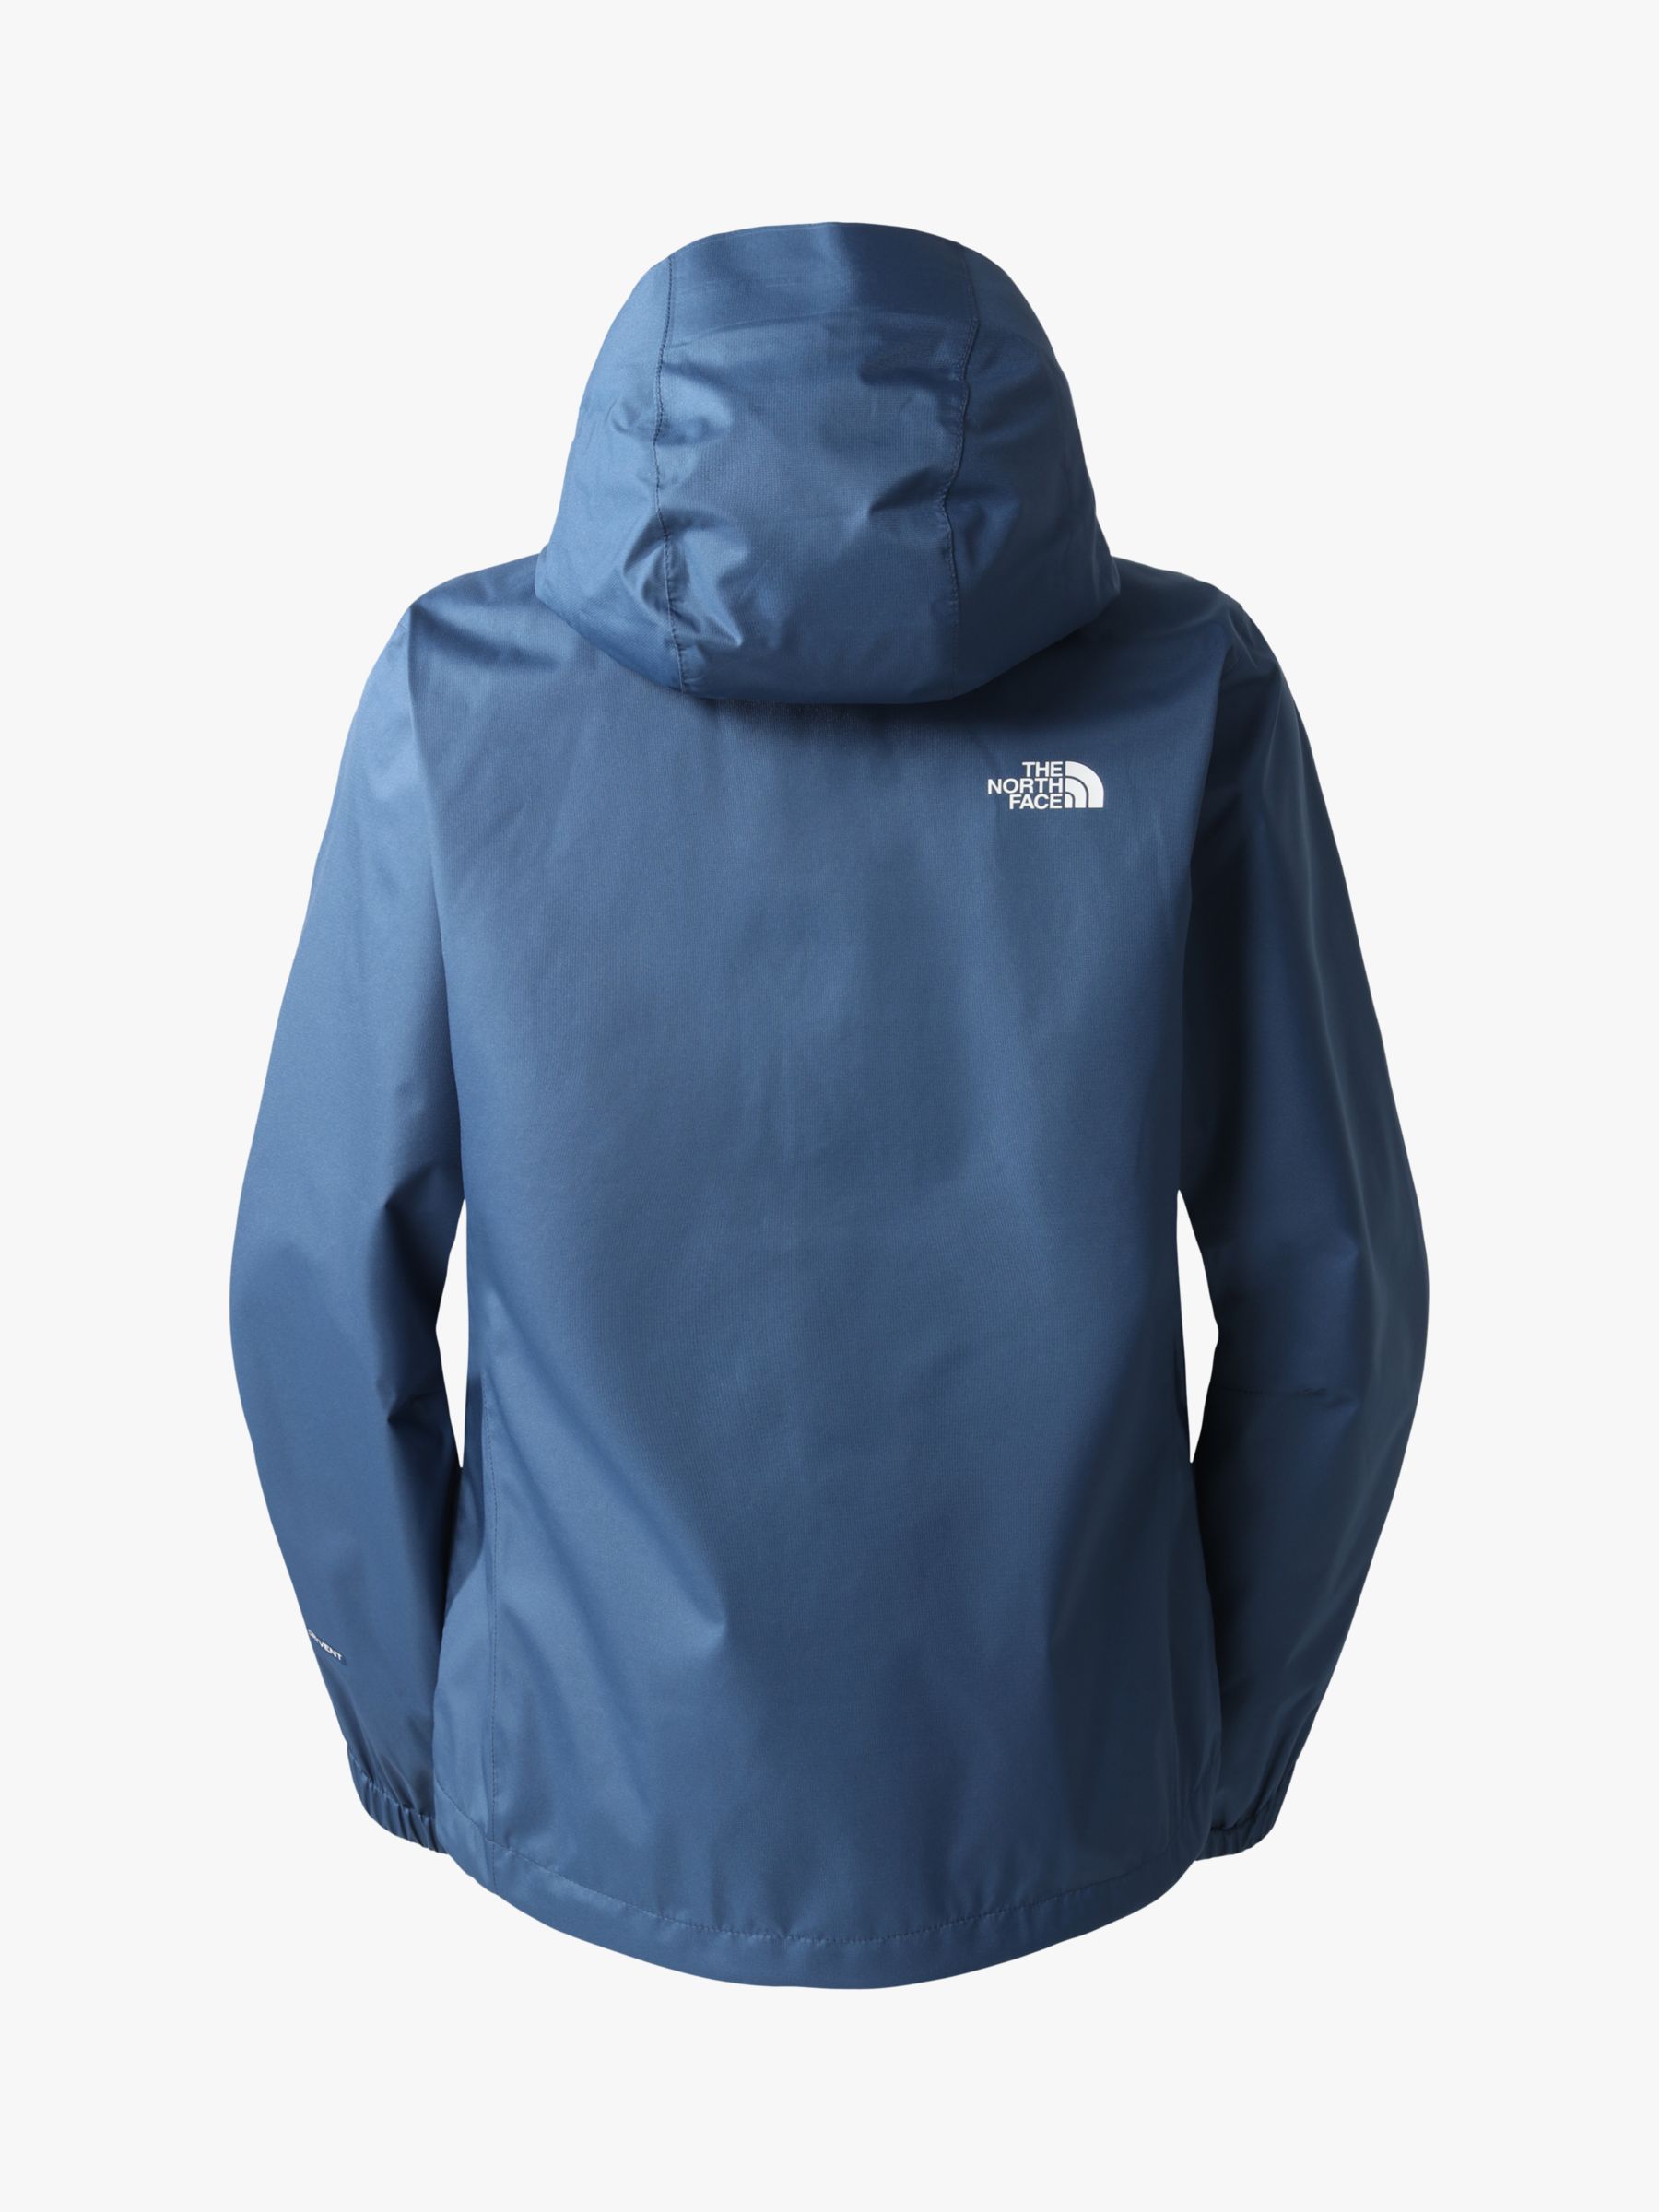 The North Face Women's Quest Hooded Jacket, Blue, M